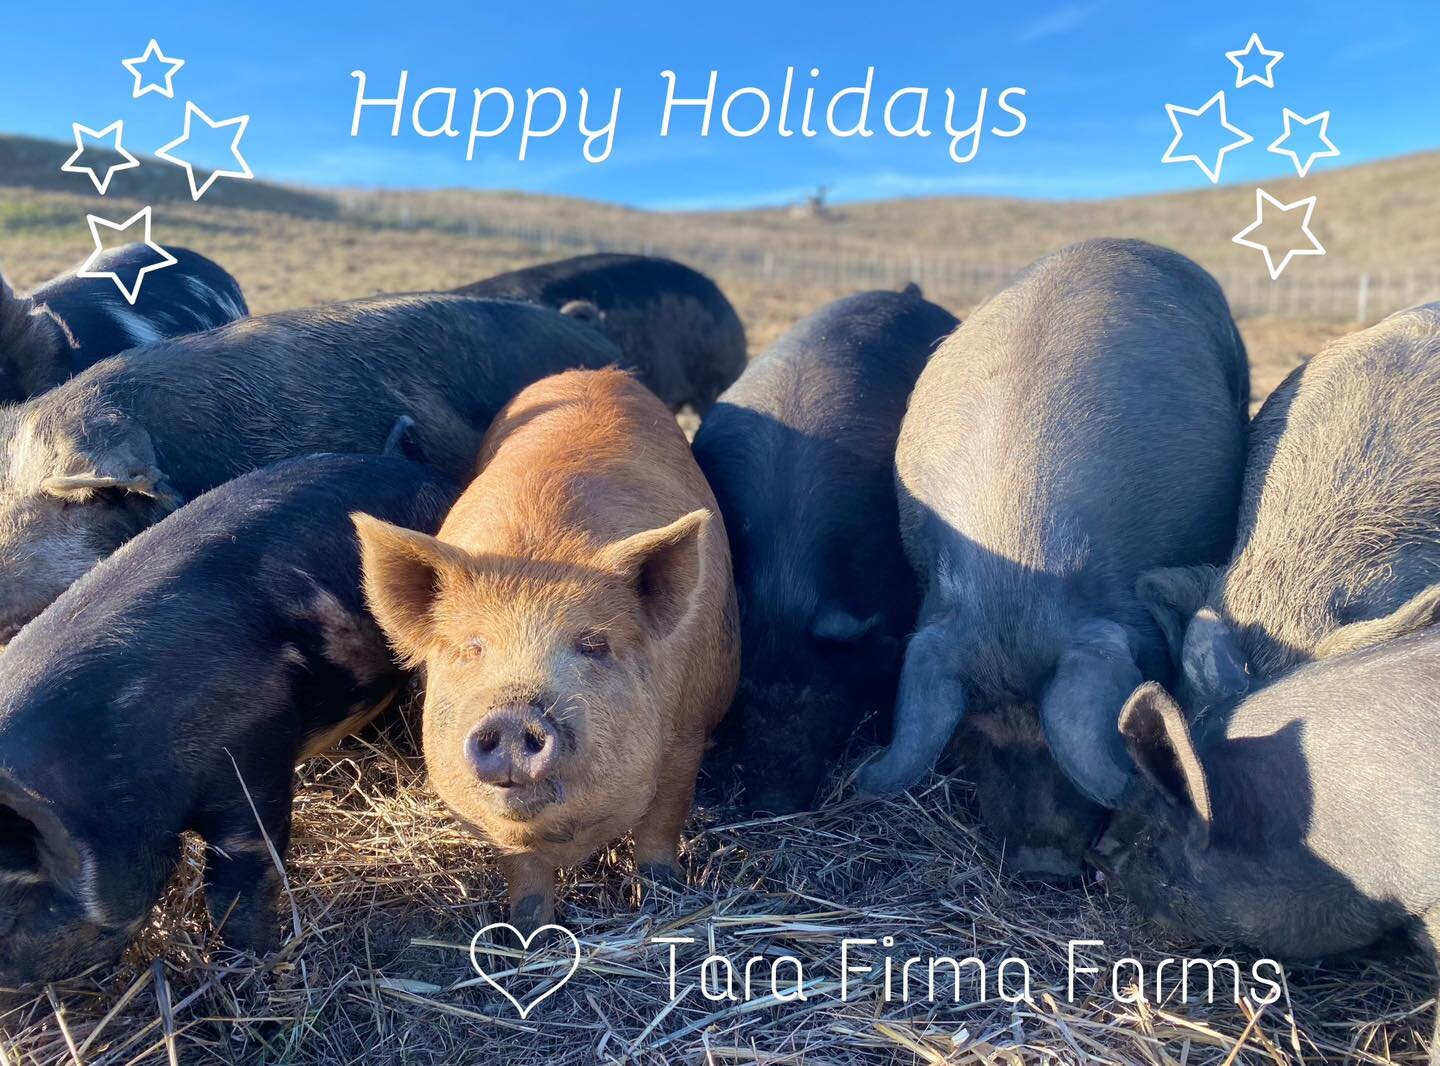 We wish you and yours a Merry Christmas from your Tara Firma Farmers. 🎄